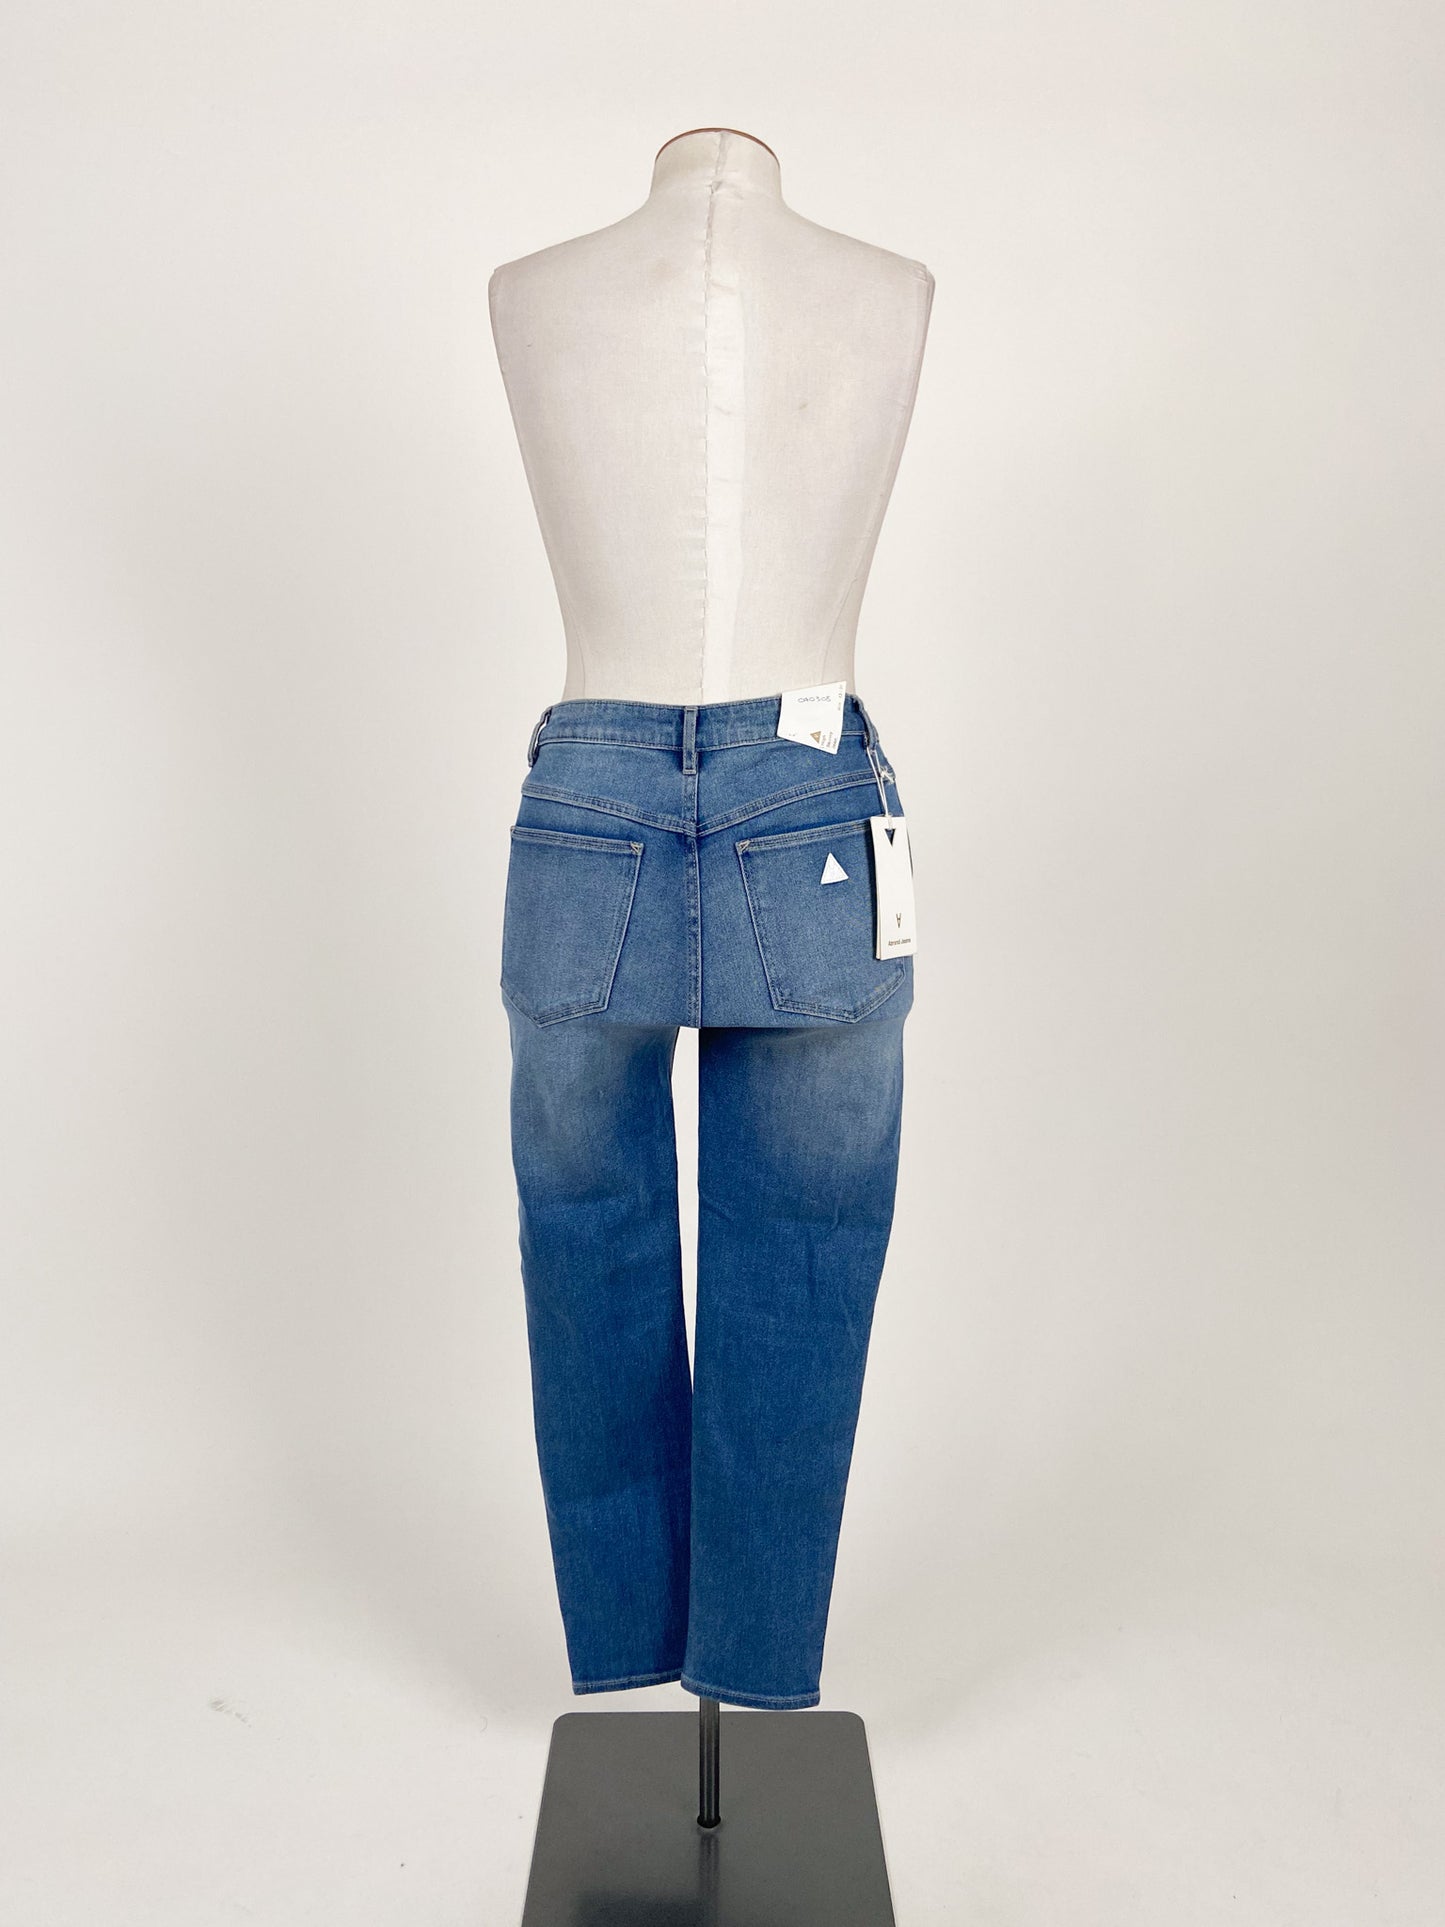 Abrand | Blue Casual Jeans | Size M